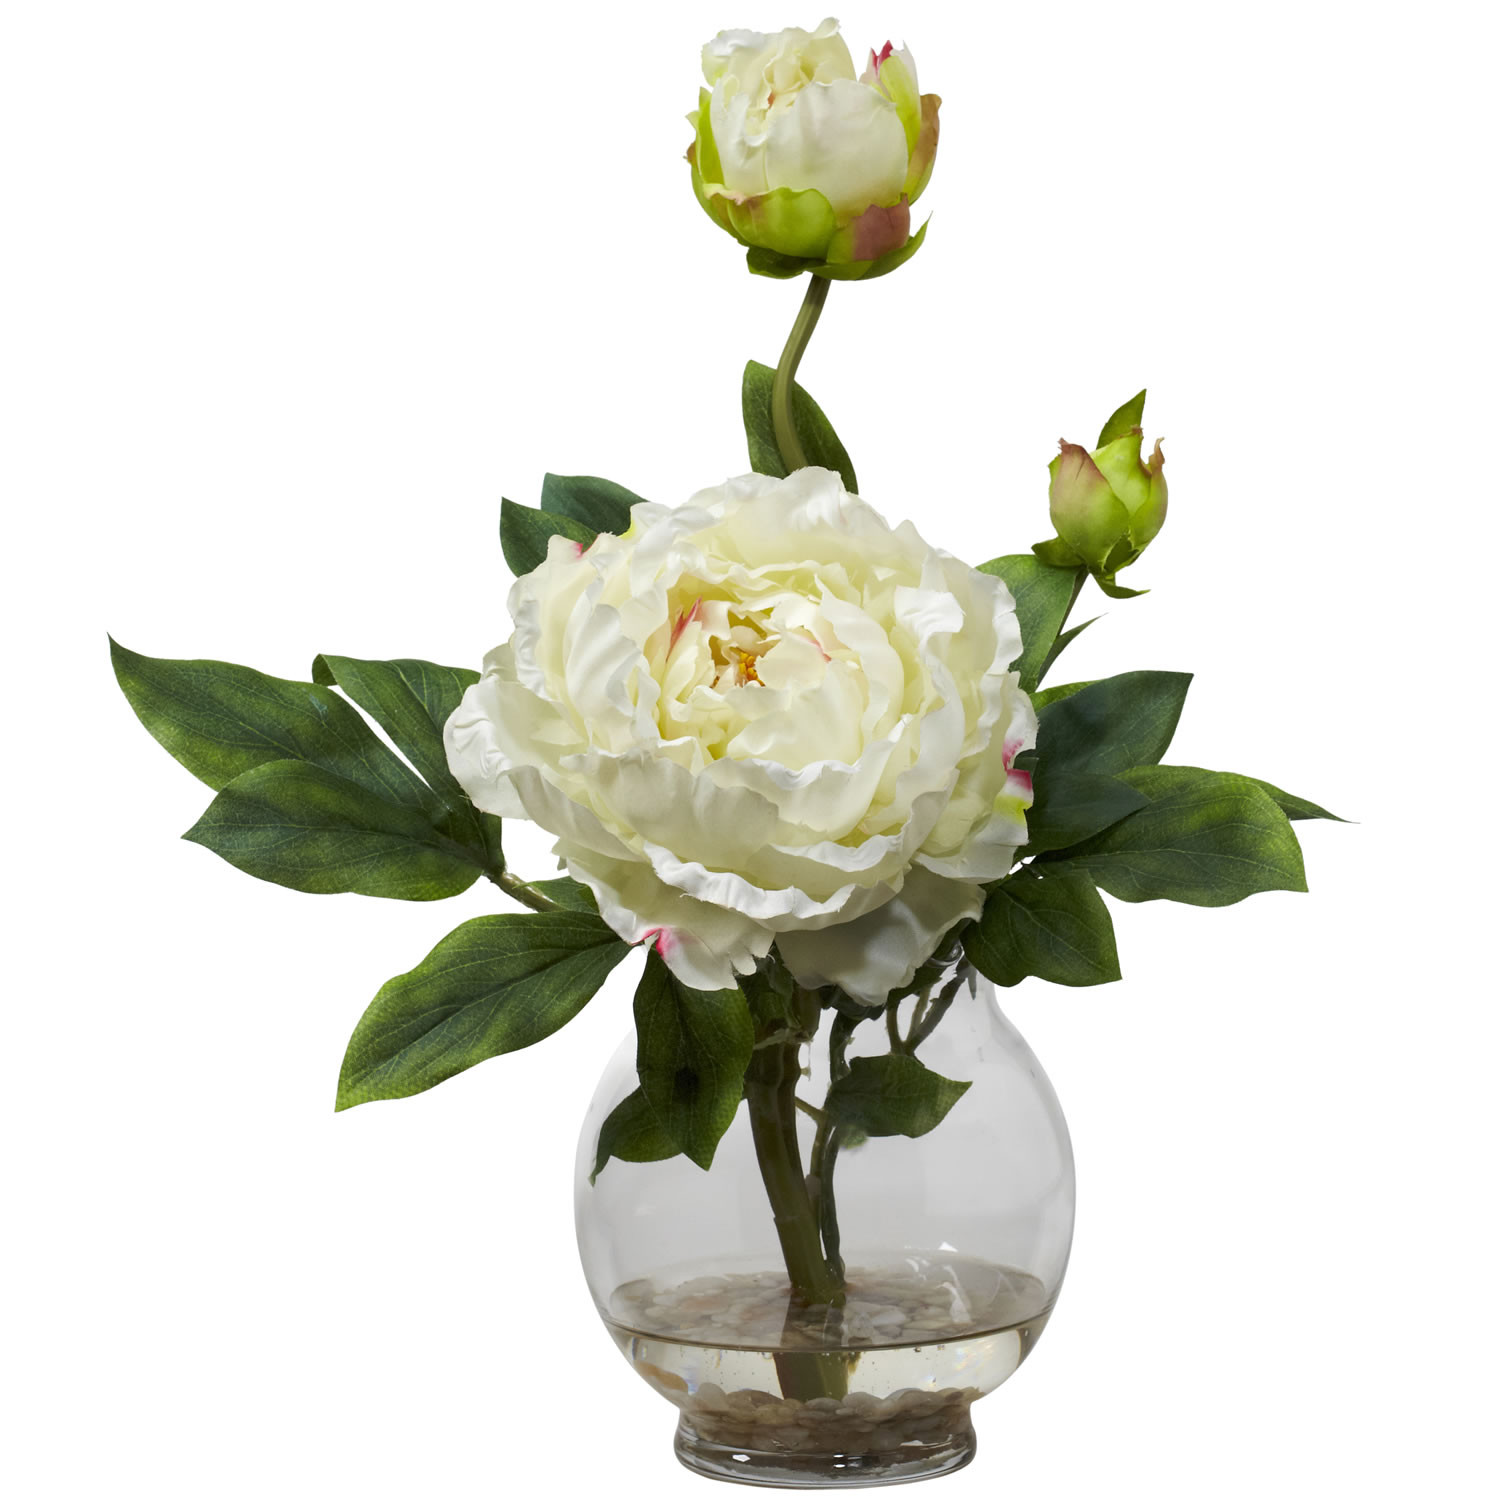 27 Best Cube Vase Centerpieces 2023 free download cube vase centerpieces of small vase flower centerpieces flowers healthy throughout white peony flower centerpiece